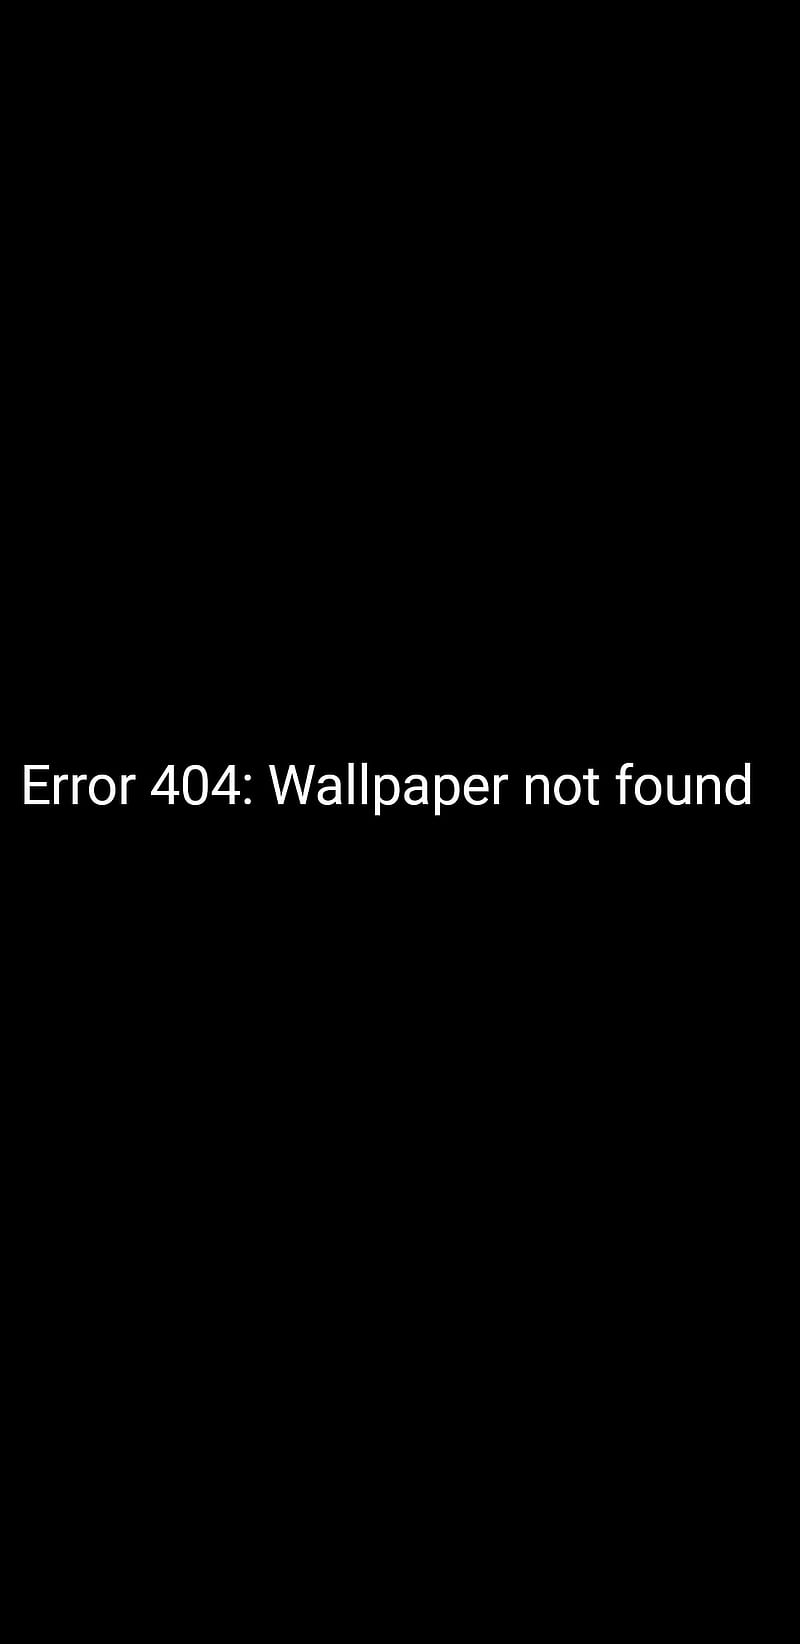 Error 404 » Free hosting, free aliases, no intrusive advertising  Hd anime  wallpapers, Anime wallpaper download, Anime wallpaper 1920x1080